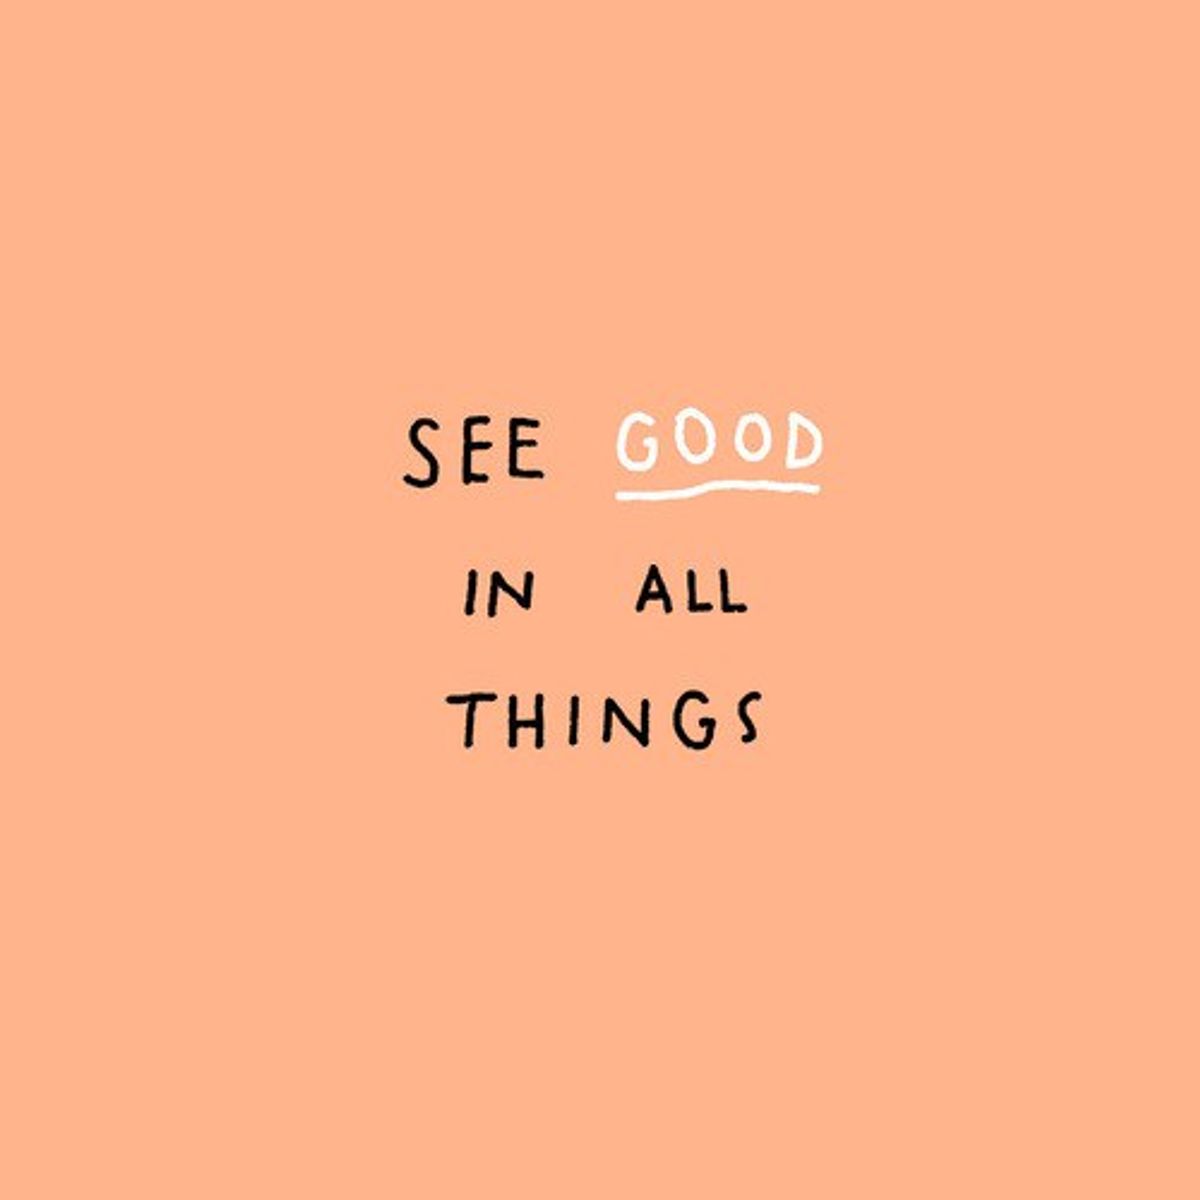 Finding Good Within The Bad: Having A Positive Outlook